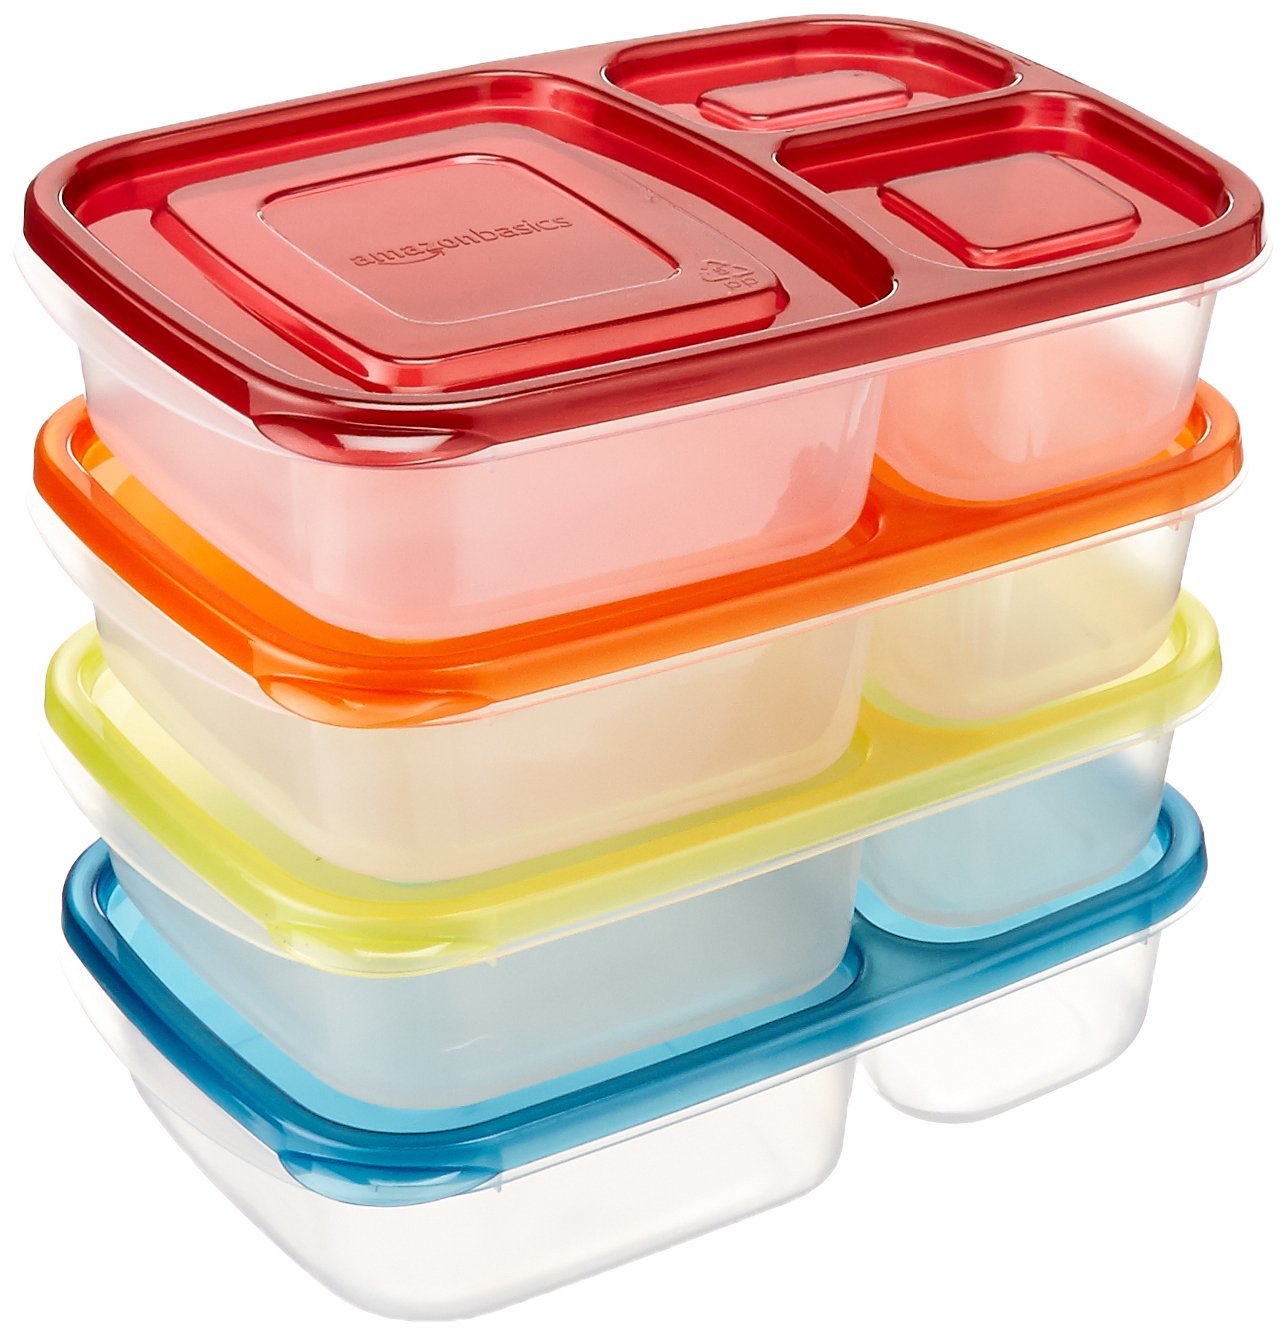 AmazonBasics Set of 4 Bento Lunch Box Containers – Just $9.99! Back to School!